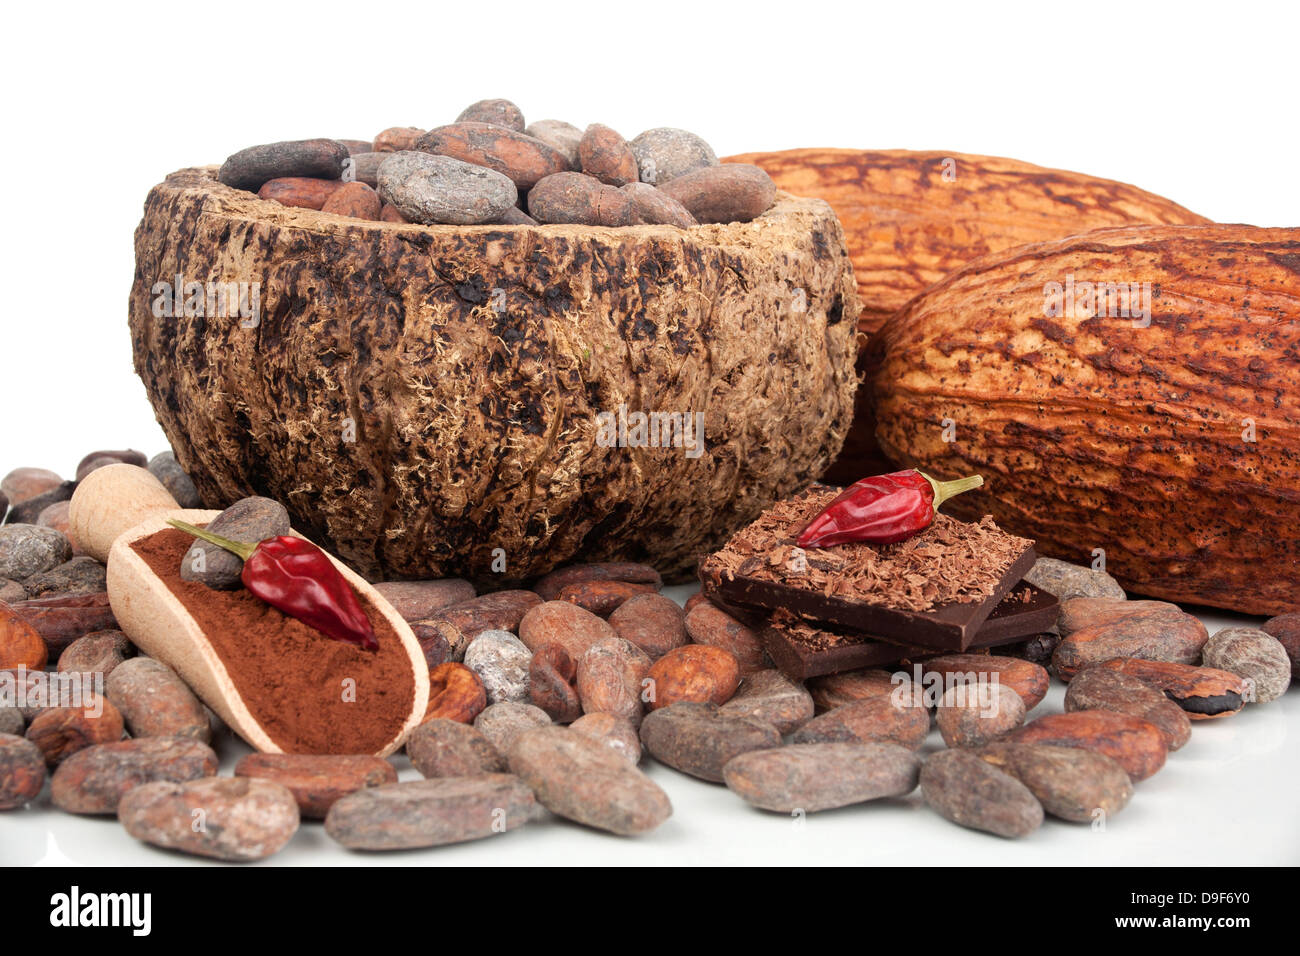 Cacao beans with cocoa powder, chocolate and chilli, Cocoa beans and cocoa powder, chocolate and chilli Stock Photo